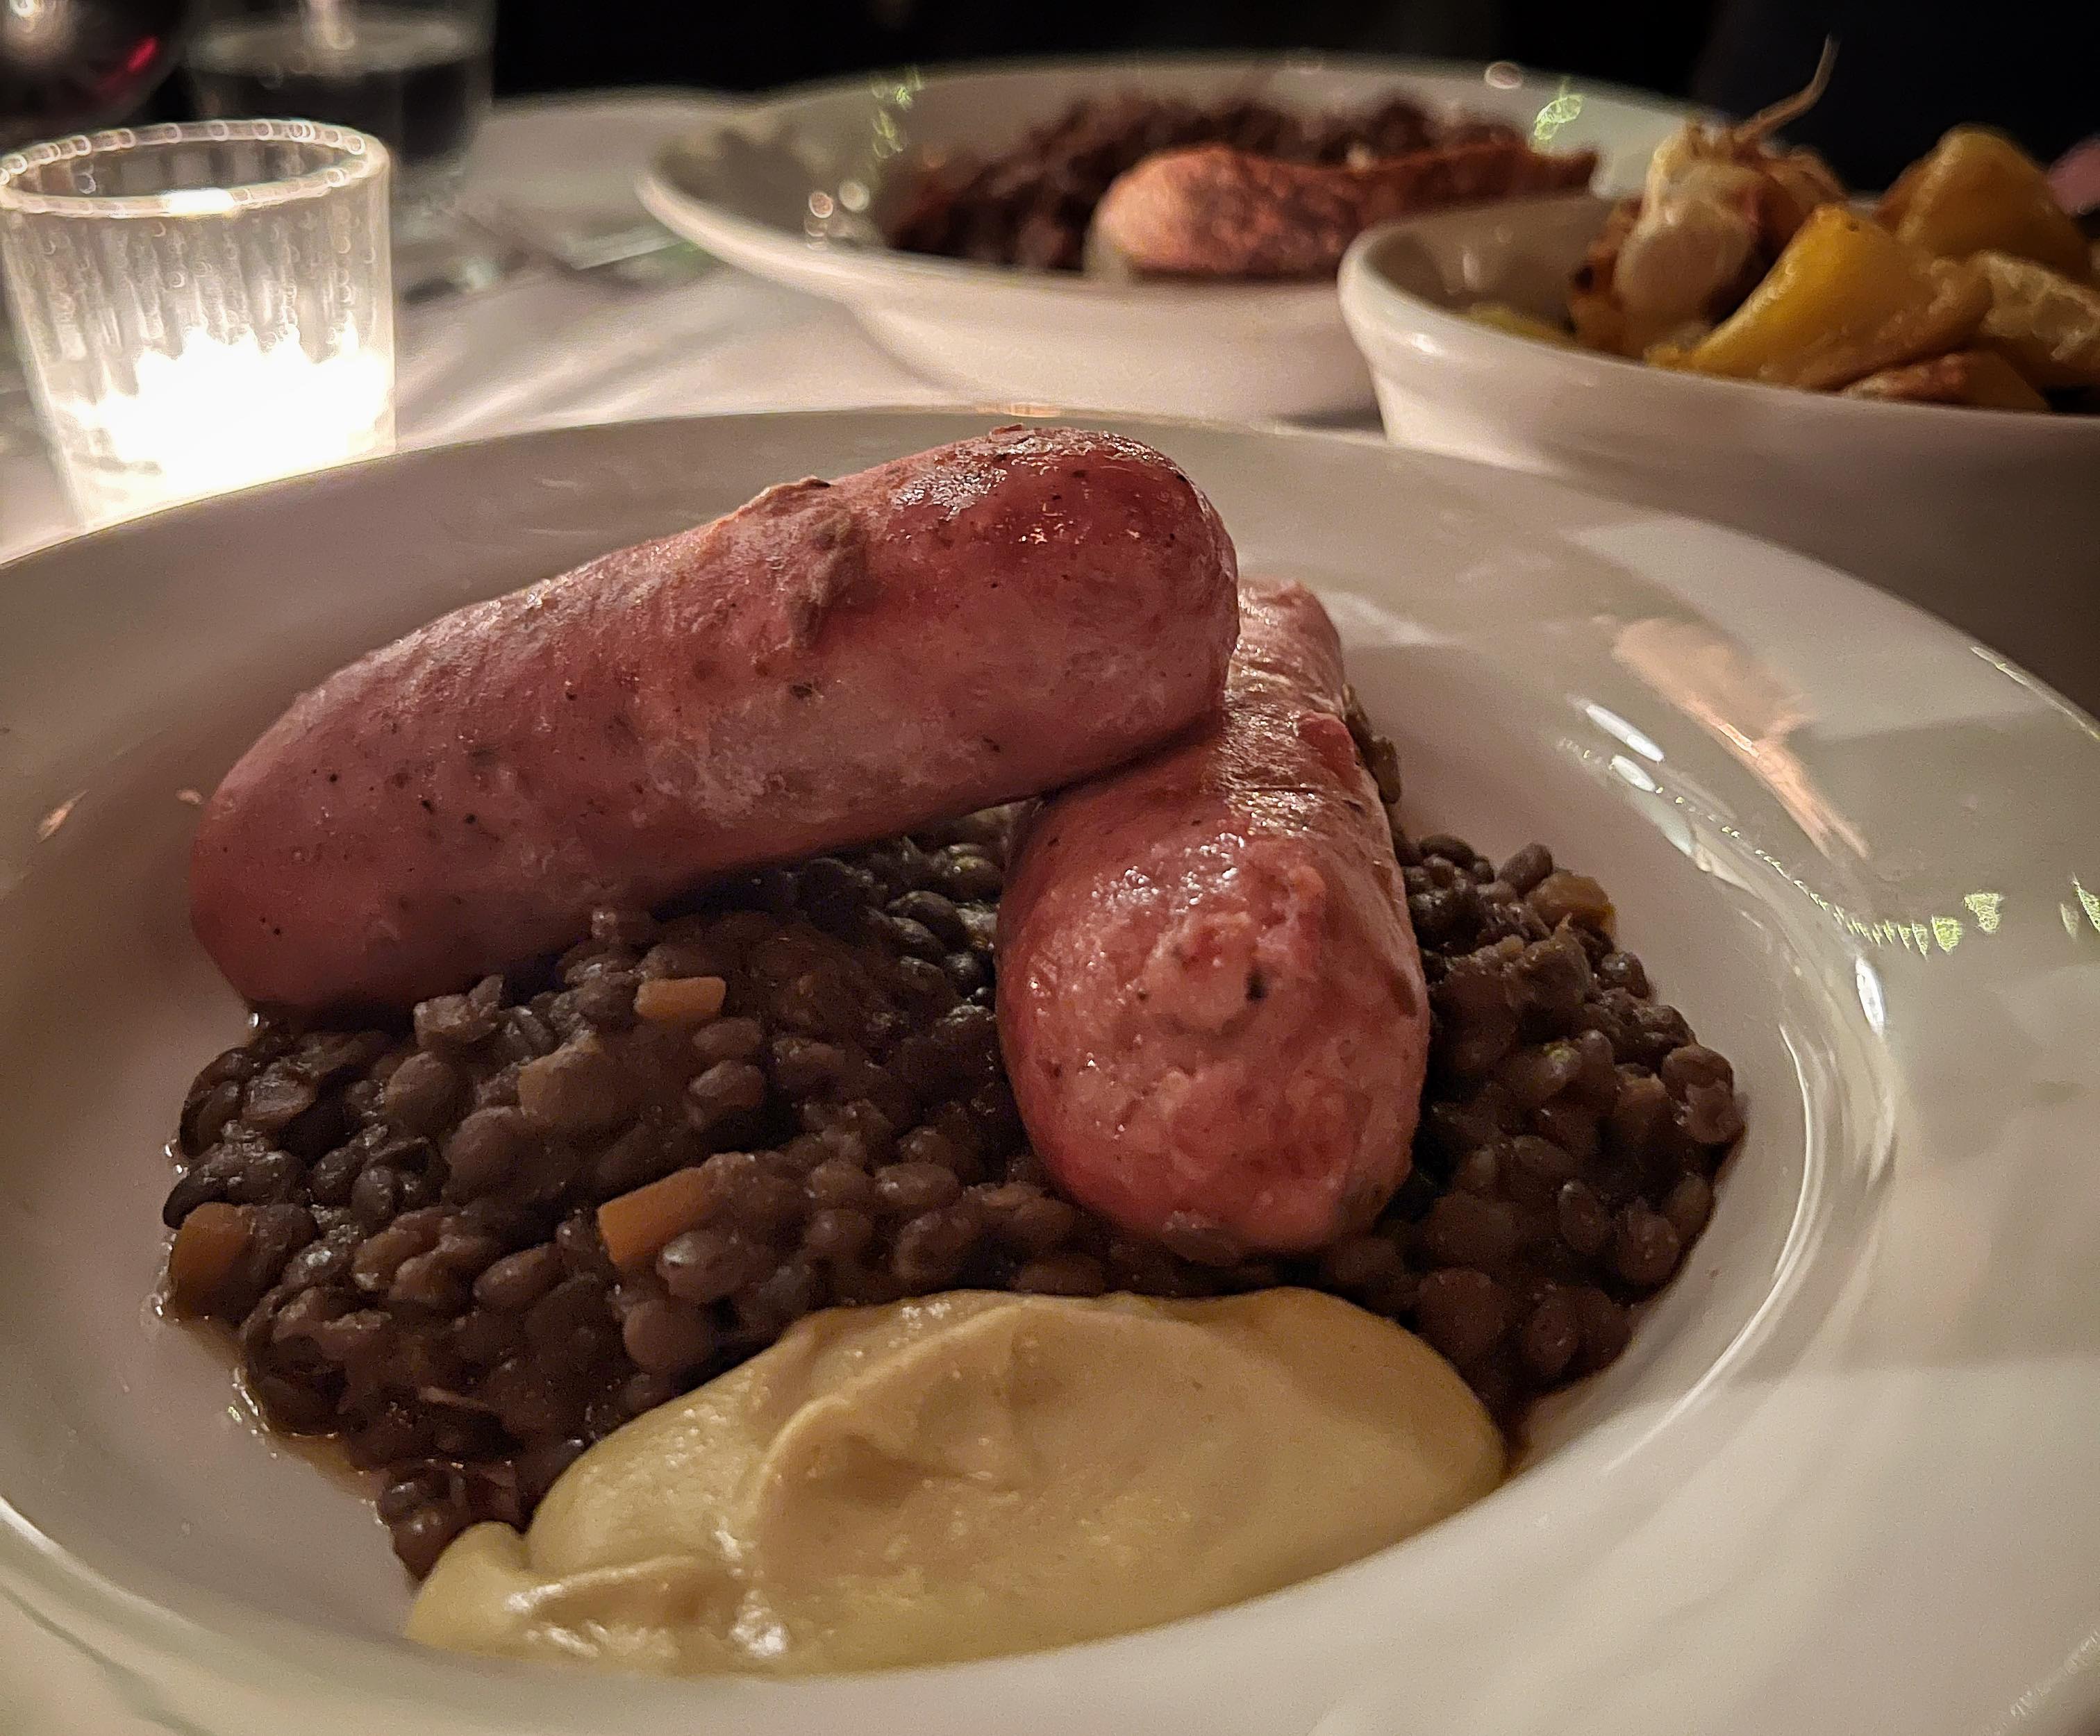 Sausages, lentils and mustard at Trattoria Brutto